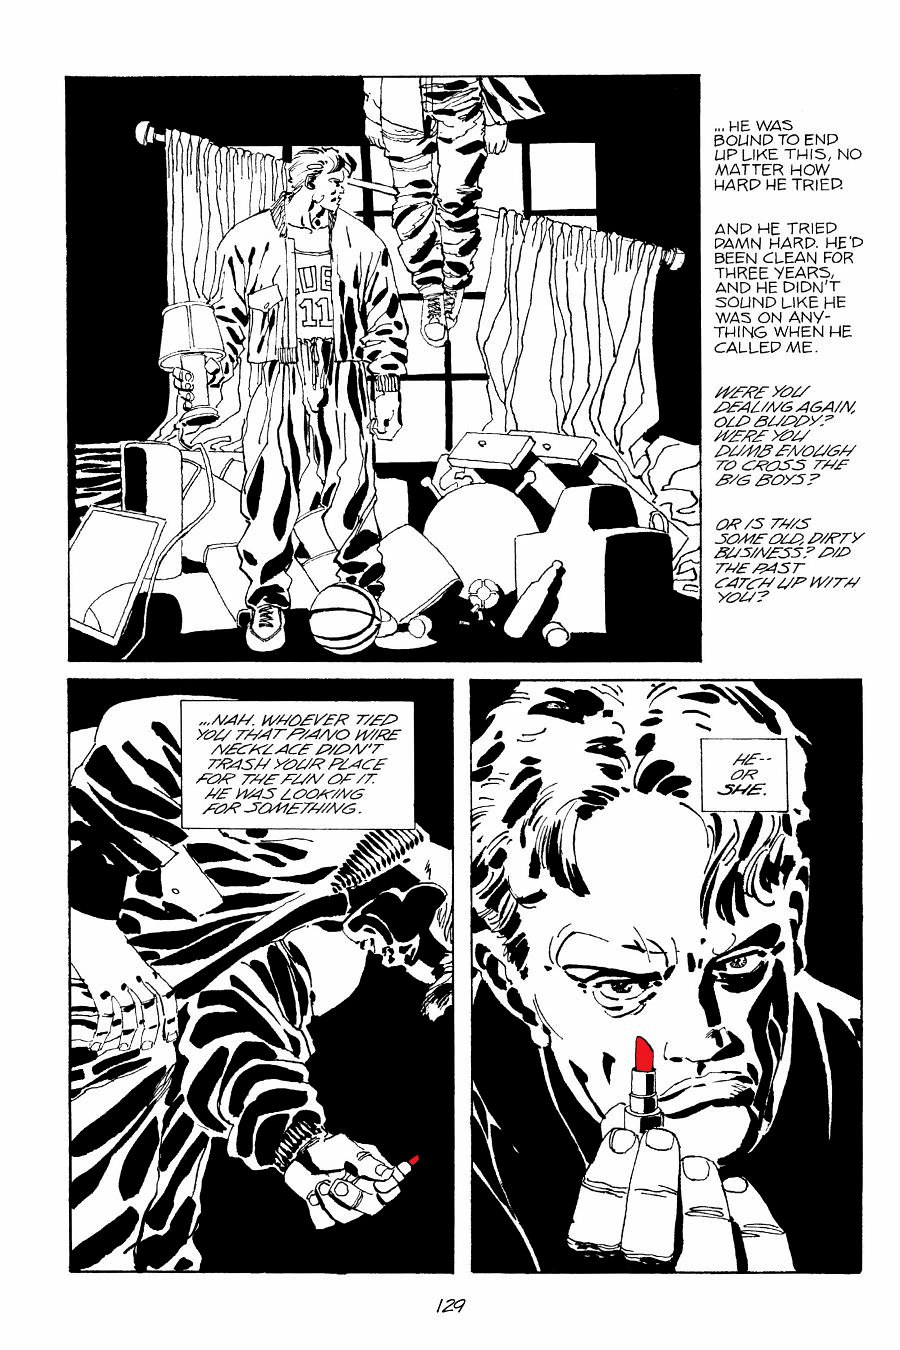 page 129 of sin city 6 booze broads and bullets